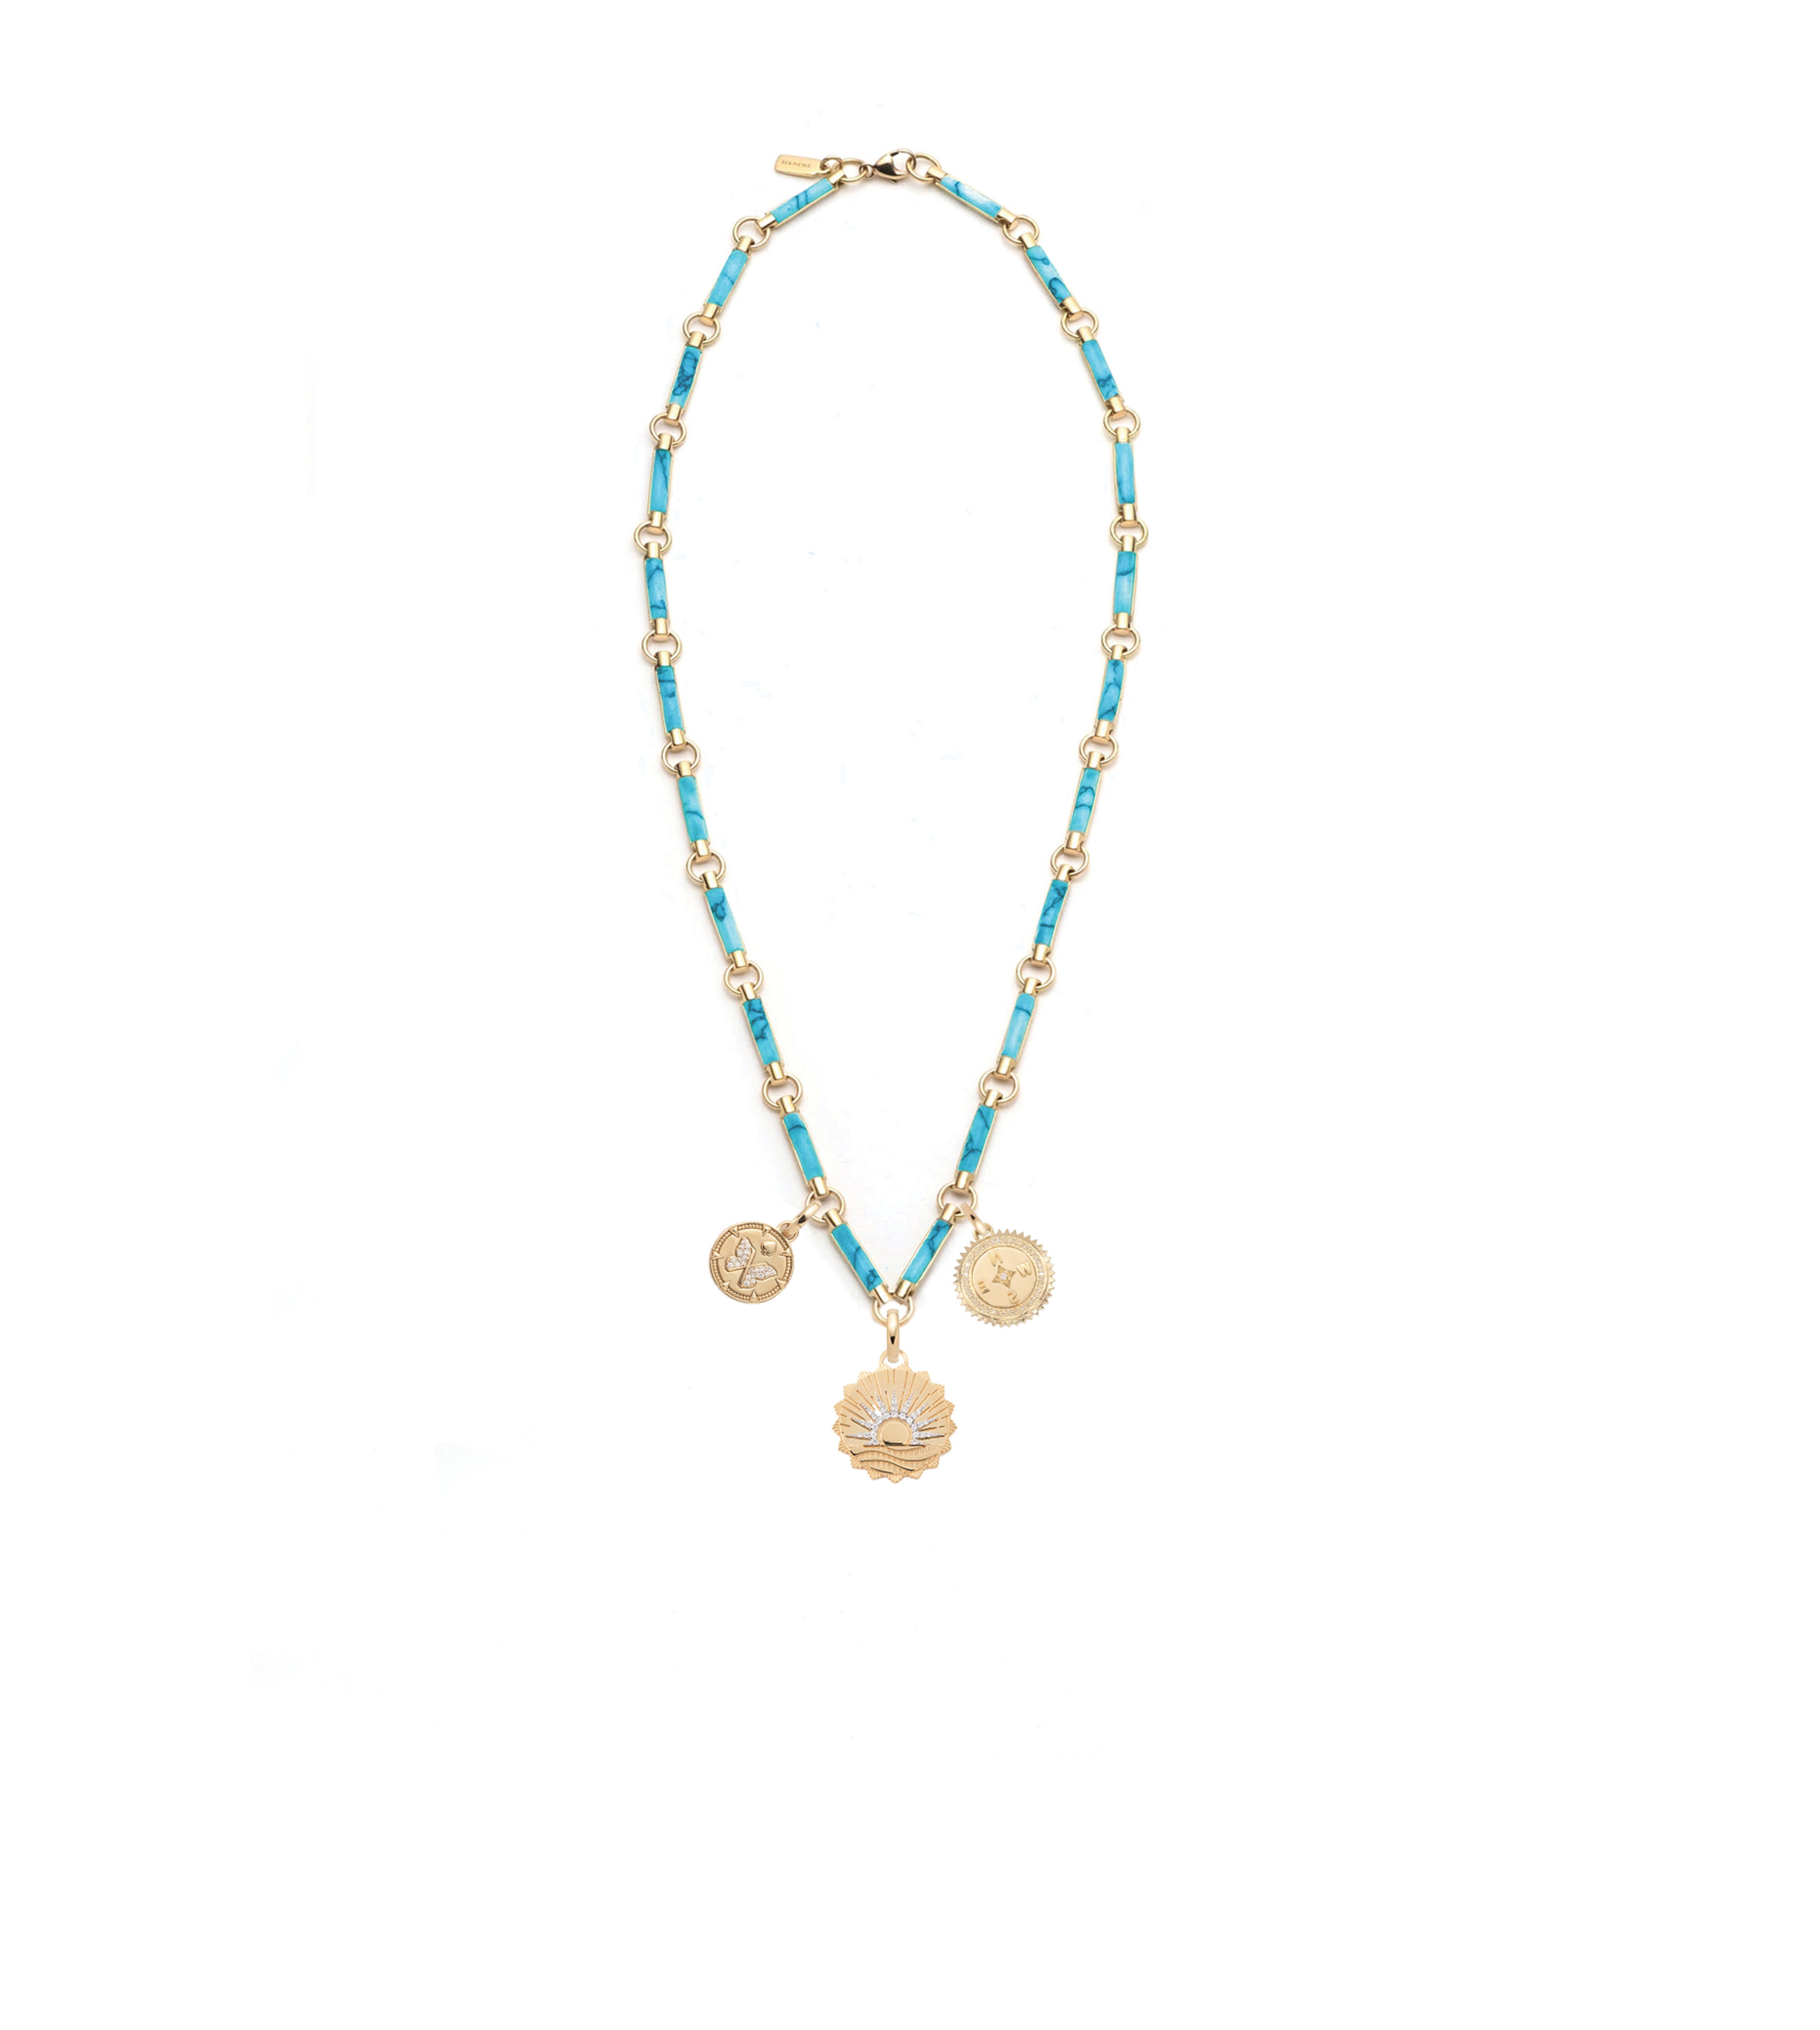 New Beginnings, Internal Compass & Resilience : Element Chain Necklace Turquoise